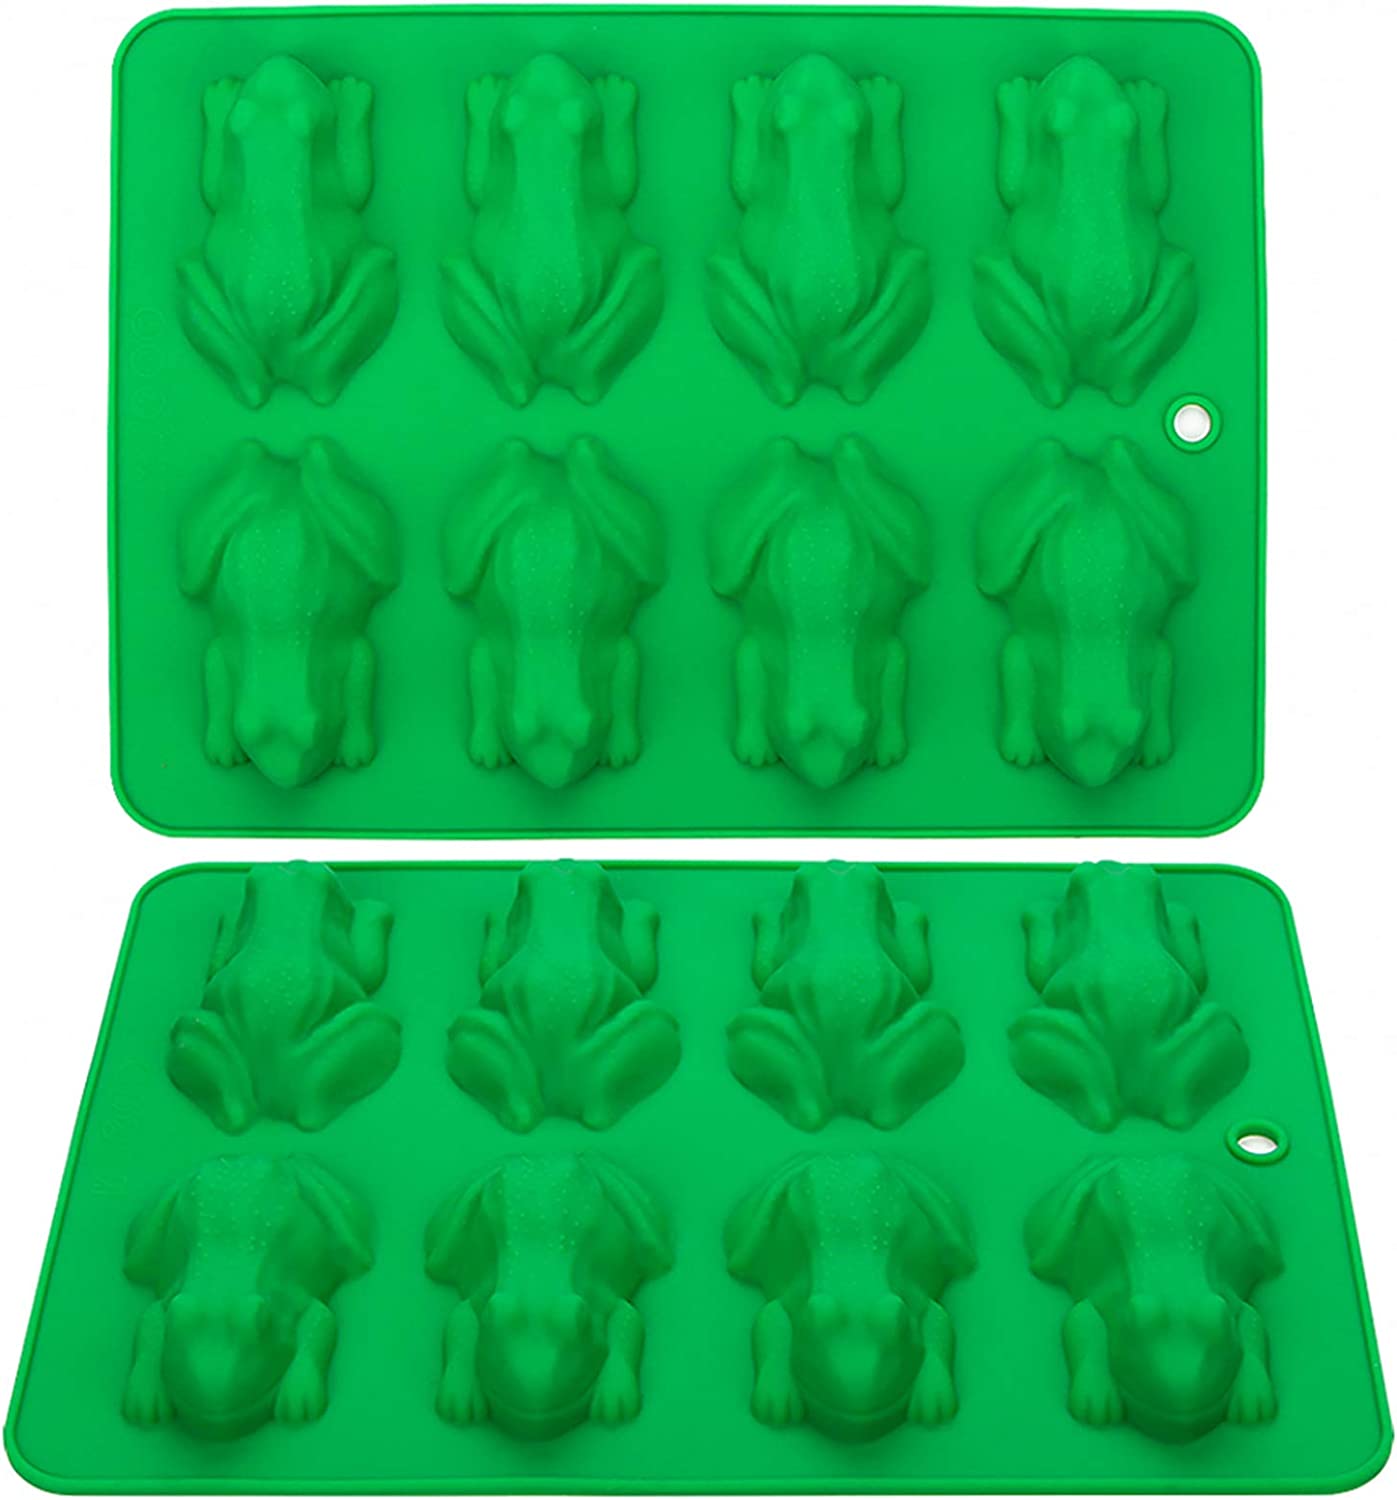 Webake flower silicone butterfly jelly resin candy chocolate mold,Pack